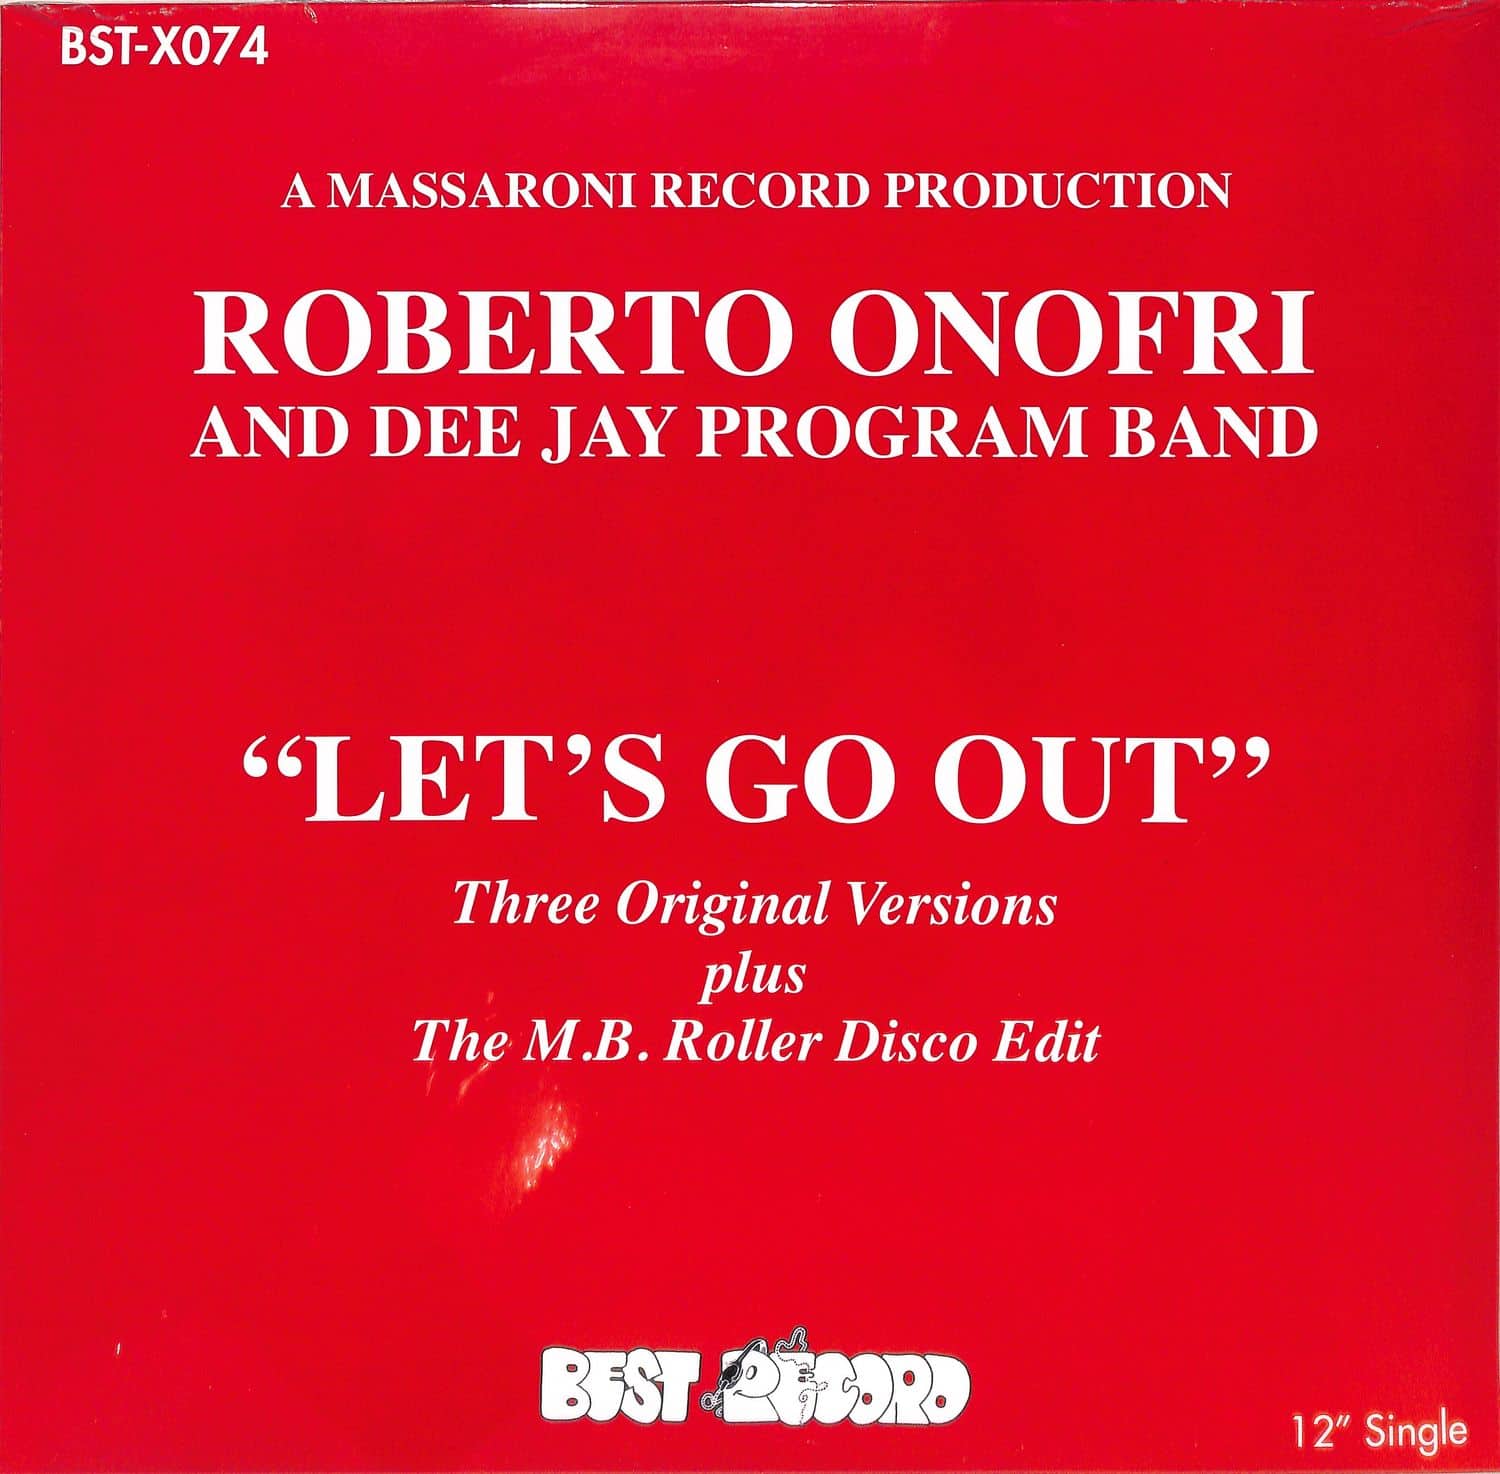 Roberto Onofri and Dee Jay Program Band - LETS GO OUT